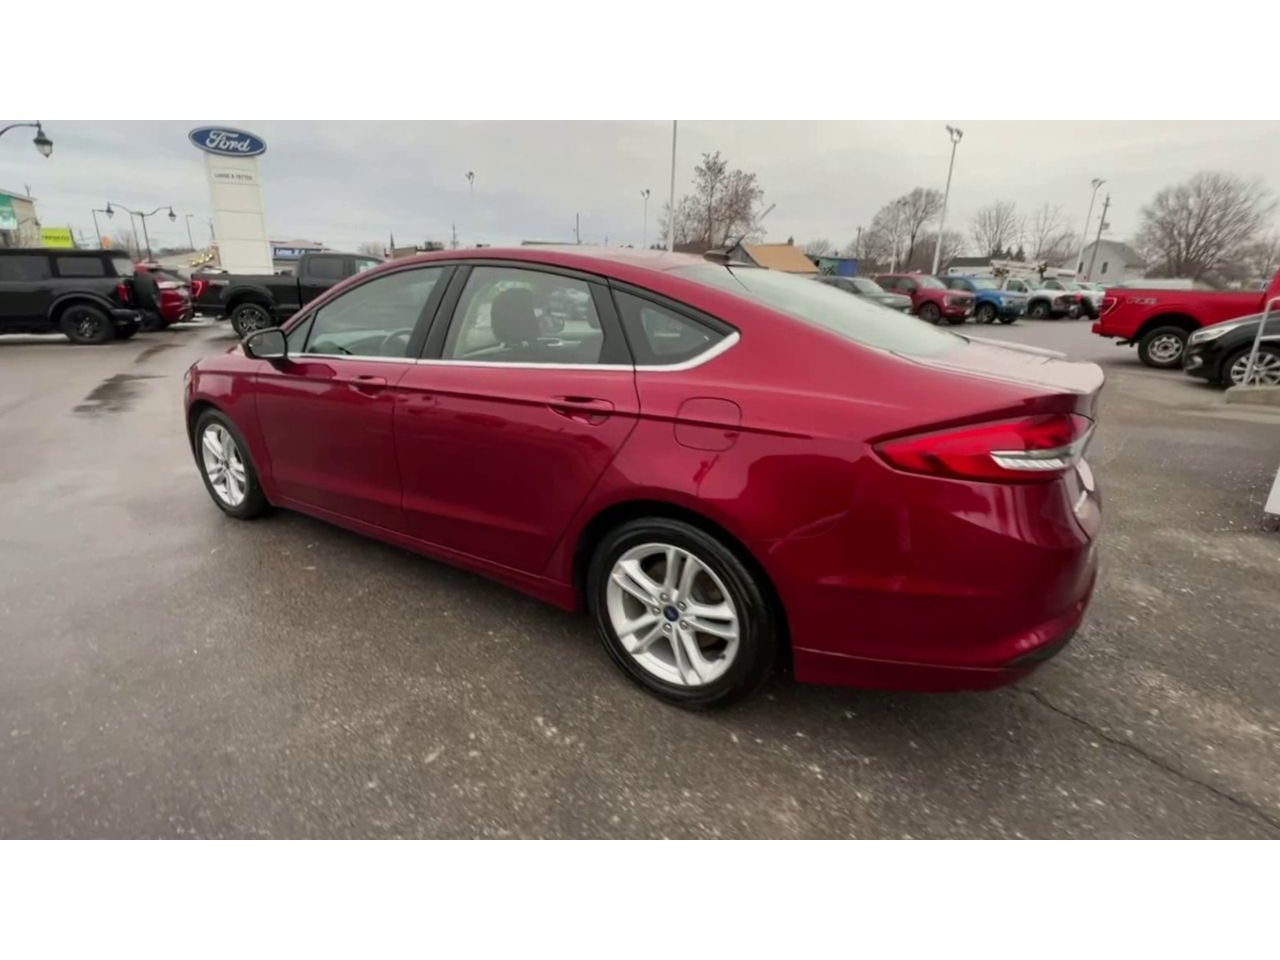 2018 Ford Fusion - P20810 Full Image 6